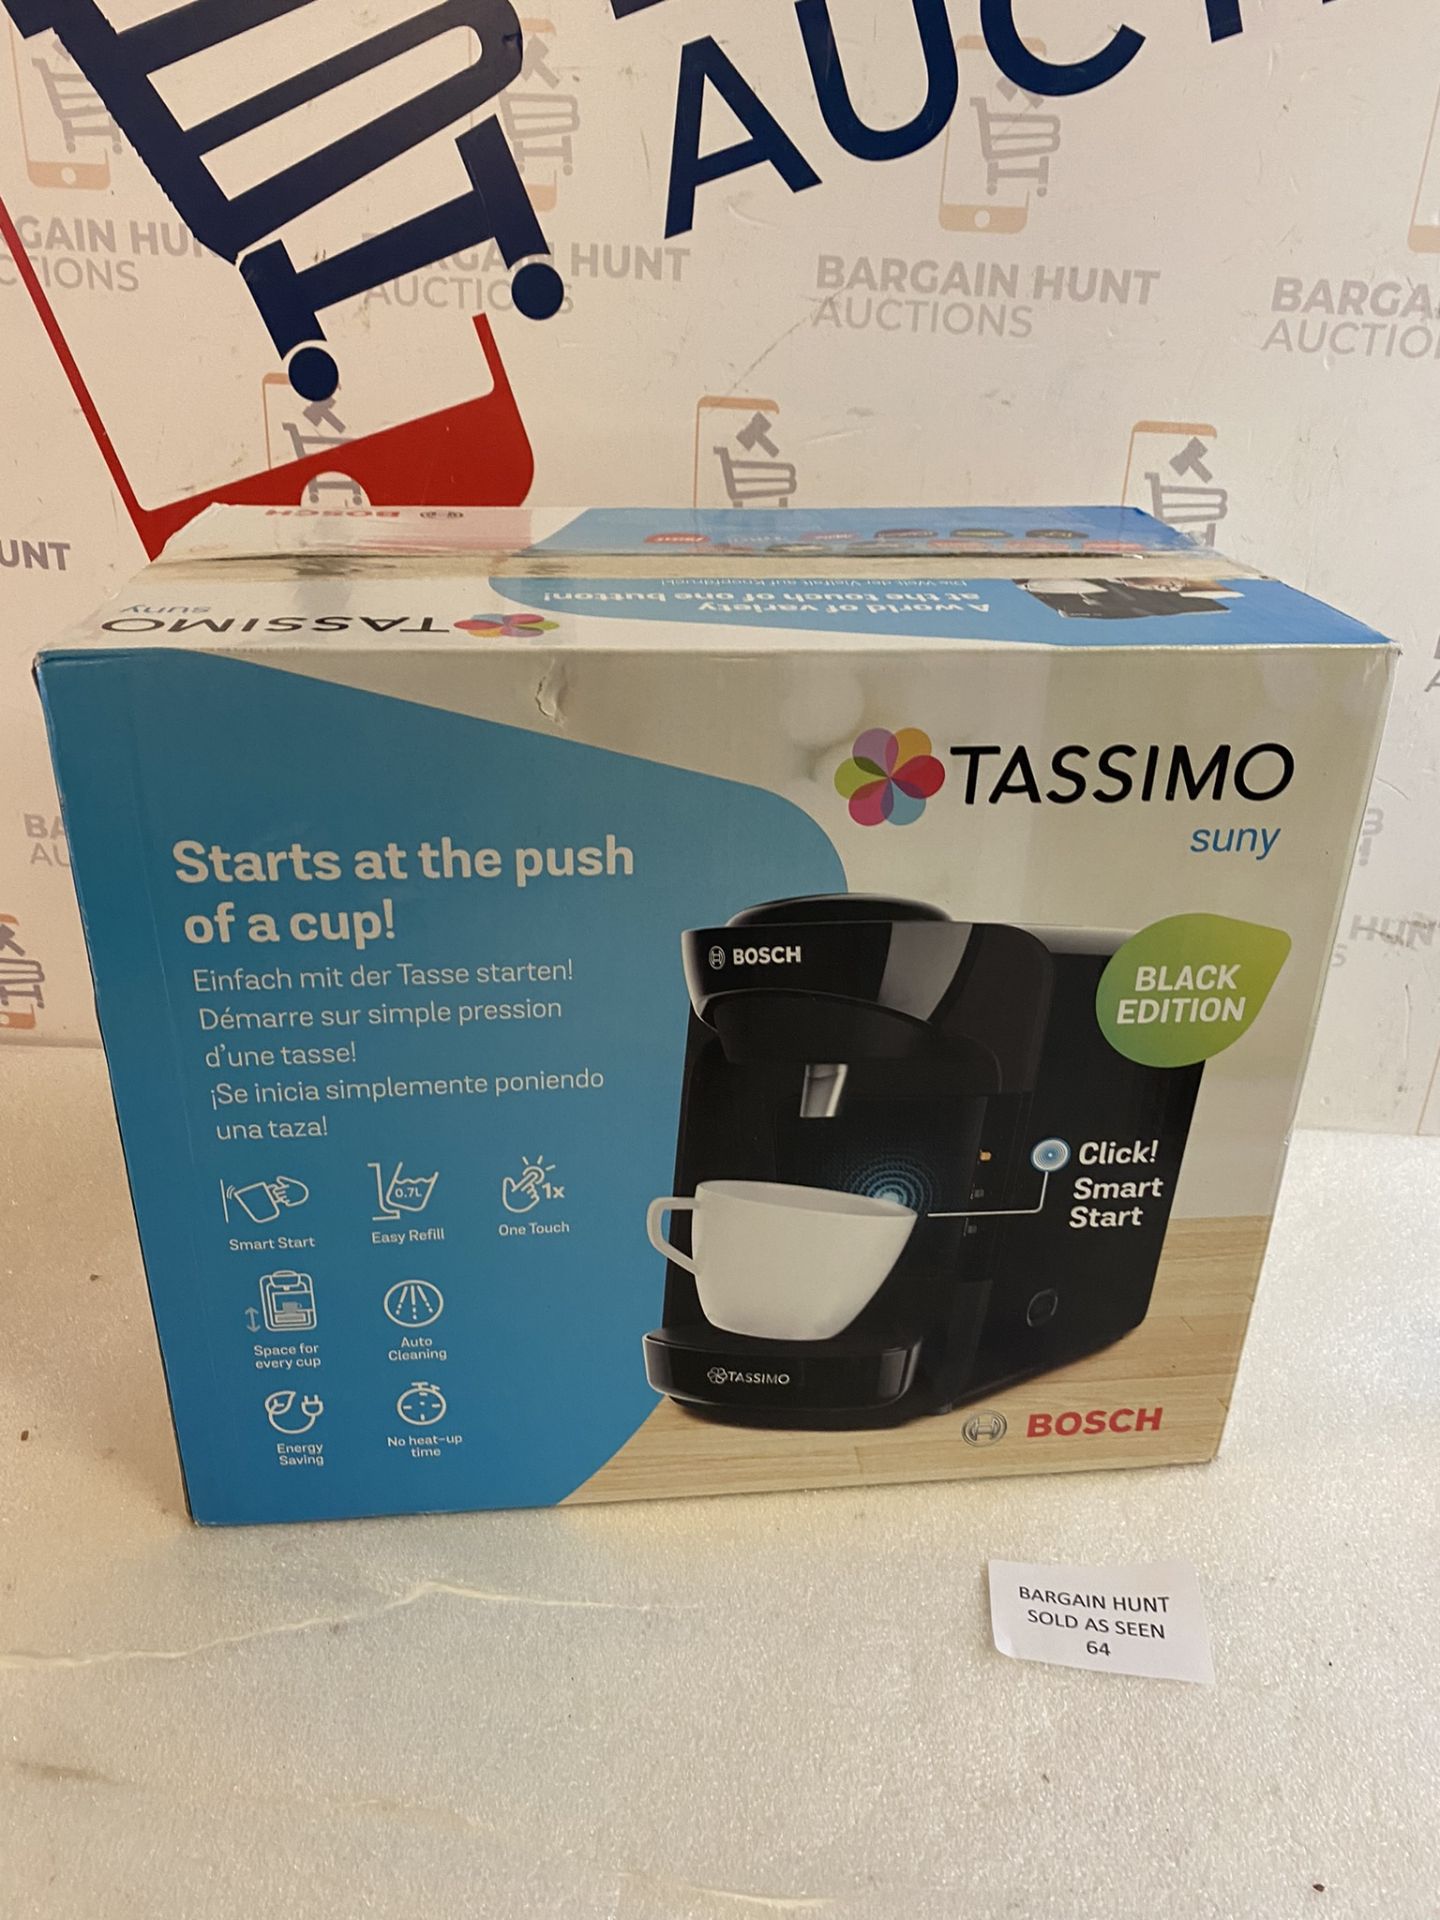 Tassimo by Bosch Suny 'Special Edition' Coffee Machine RRP £29.99